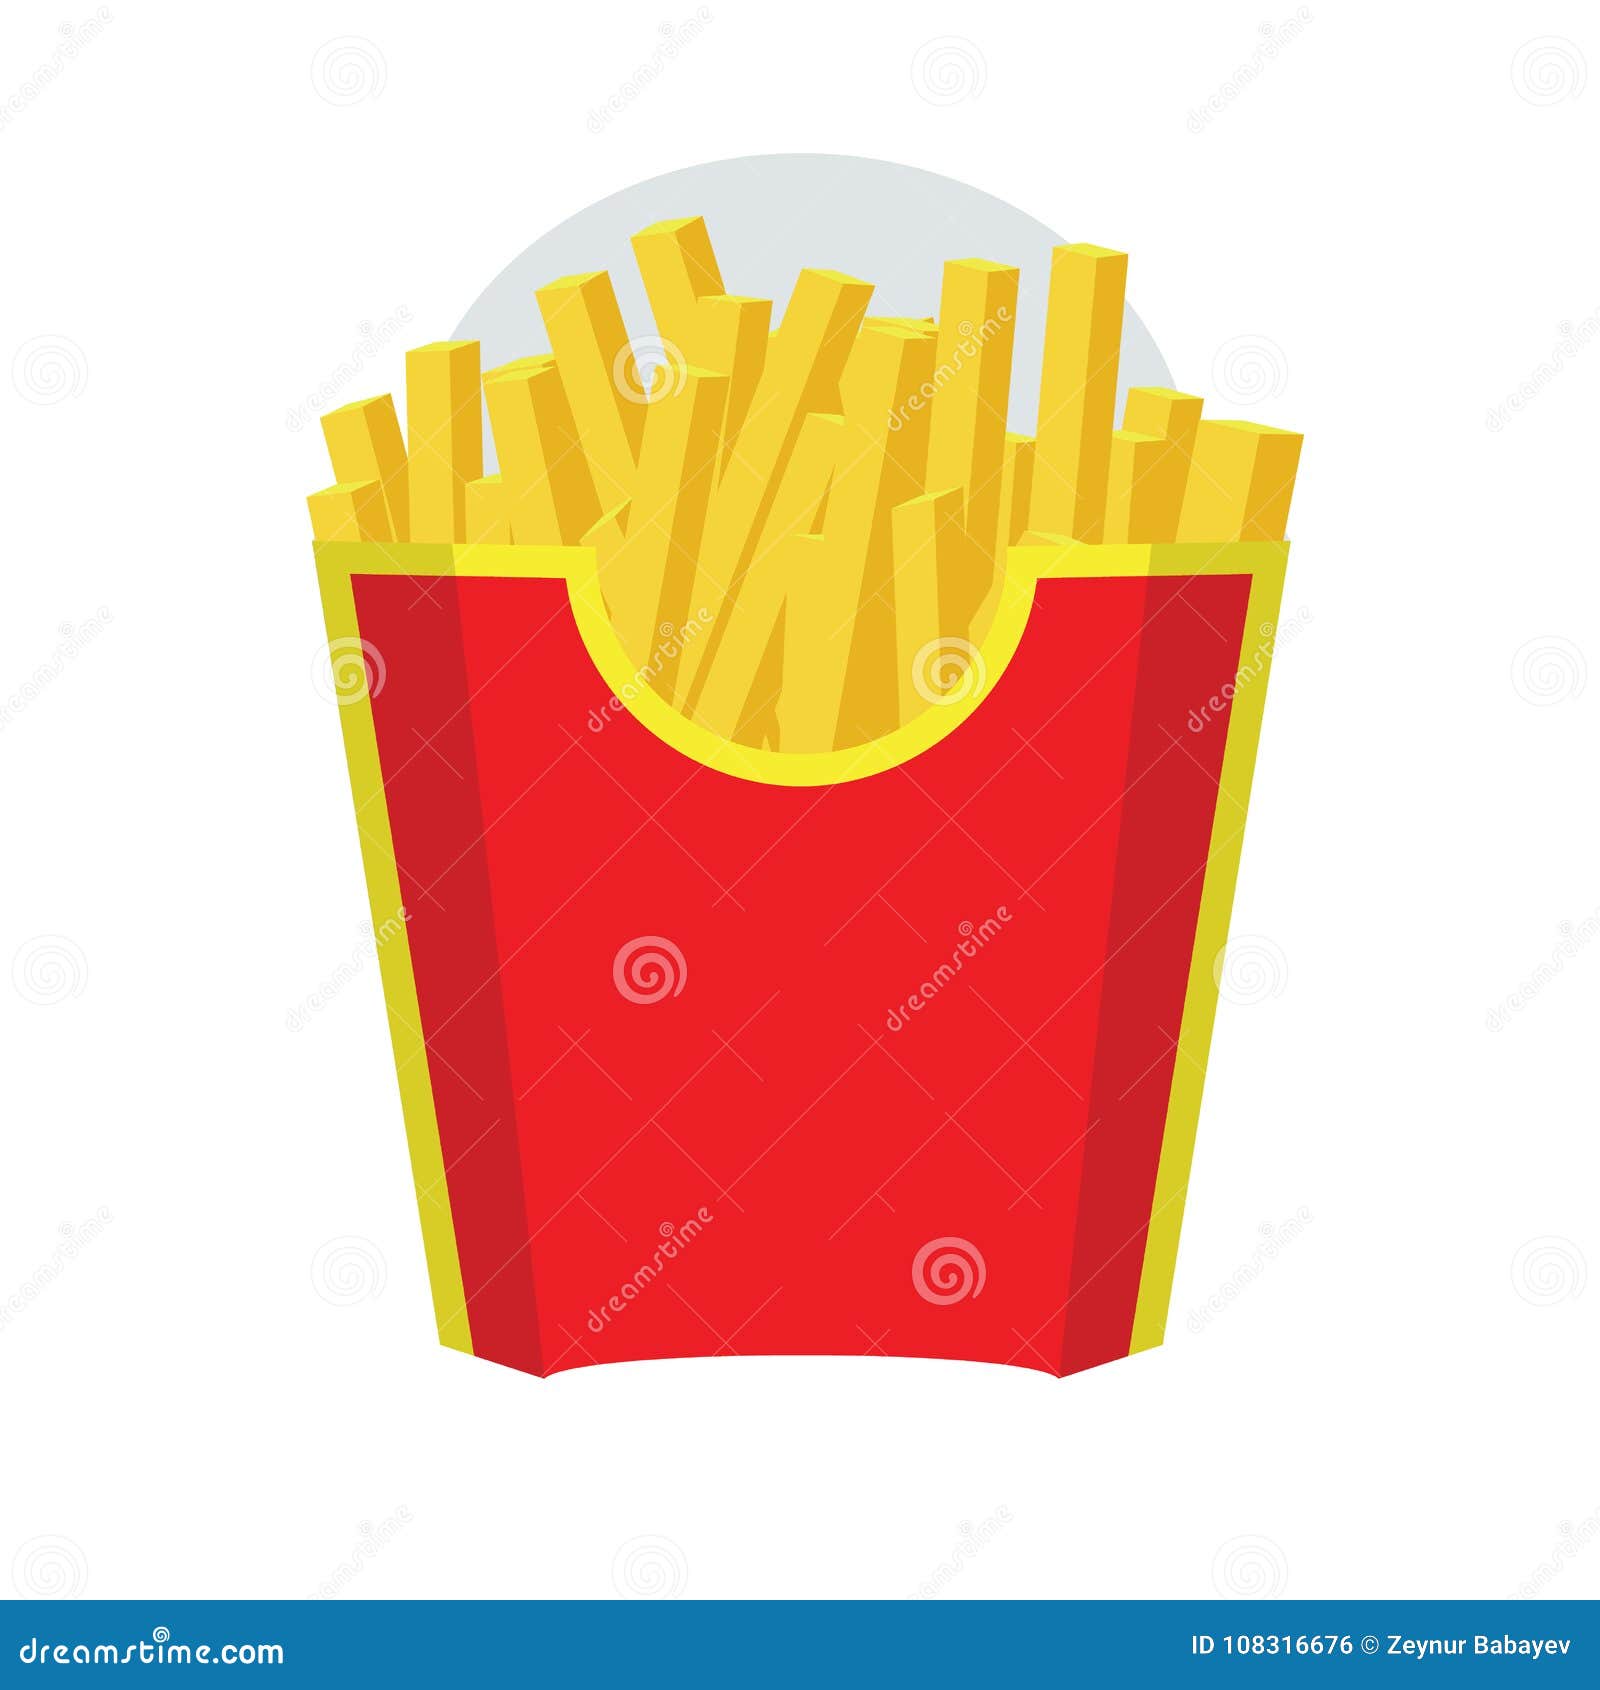 Kraft Paper Large Size French Fries Packaging Mockup - Front View